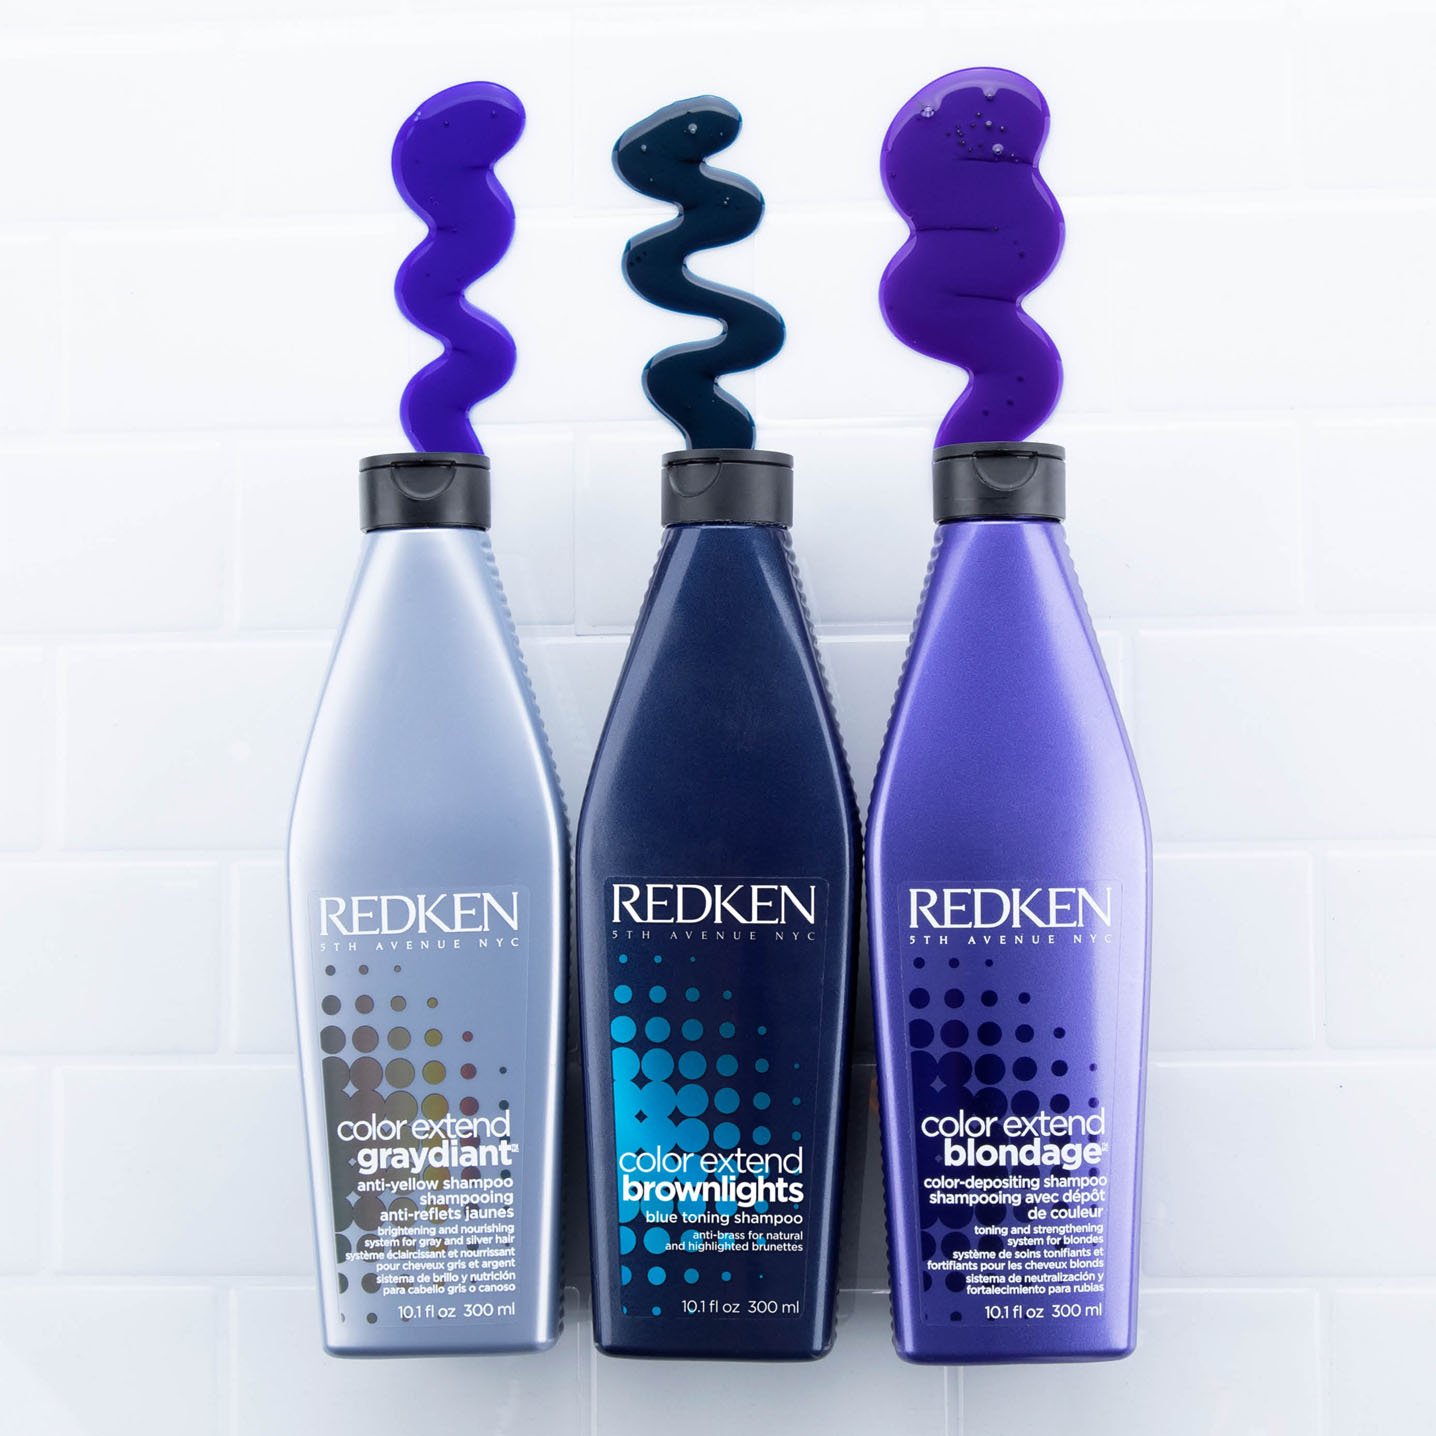 is the difference between shampoo, purple silver shampoo?